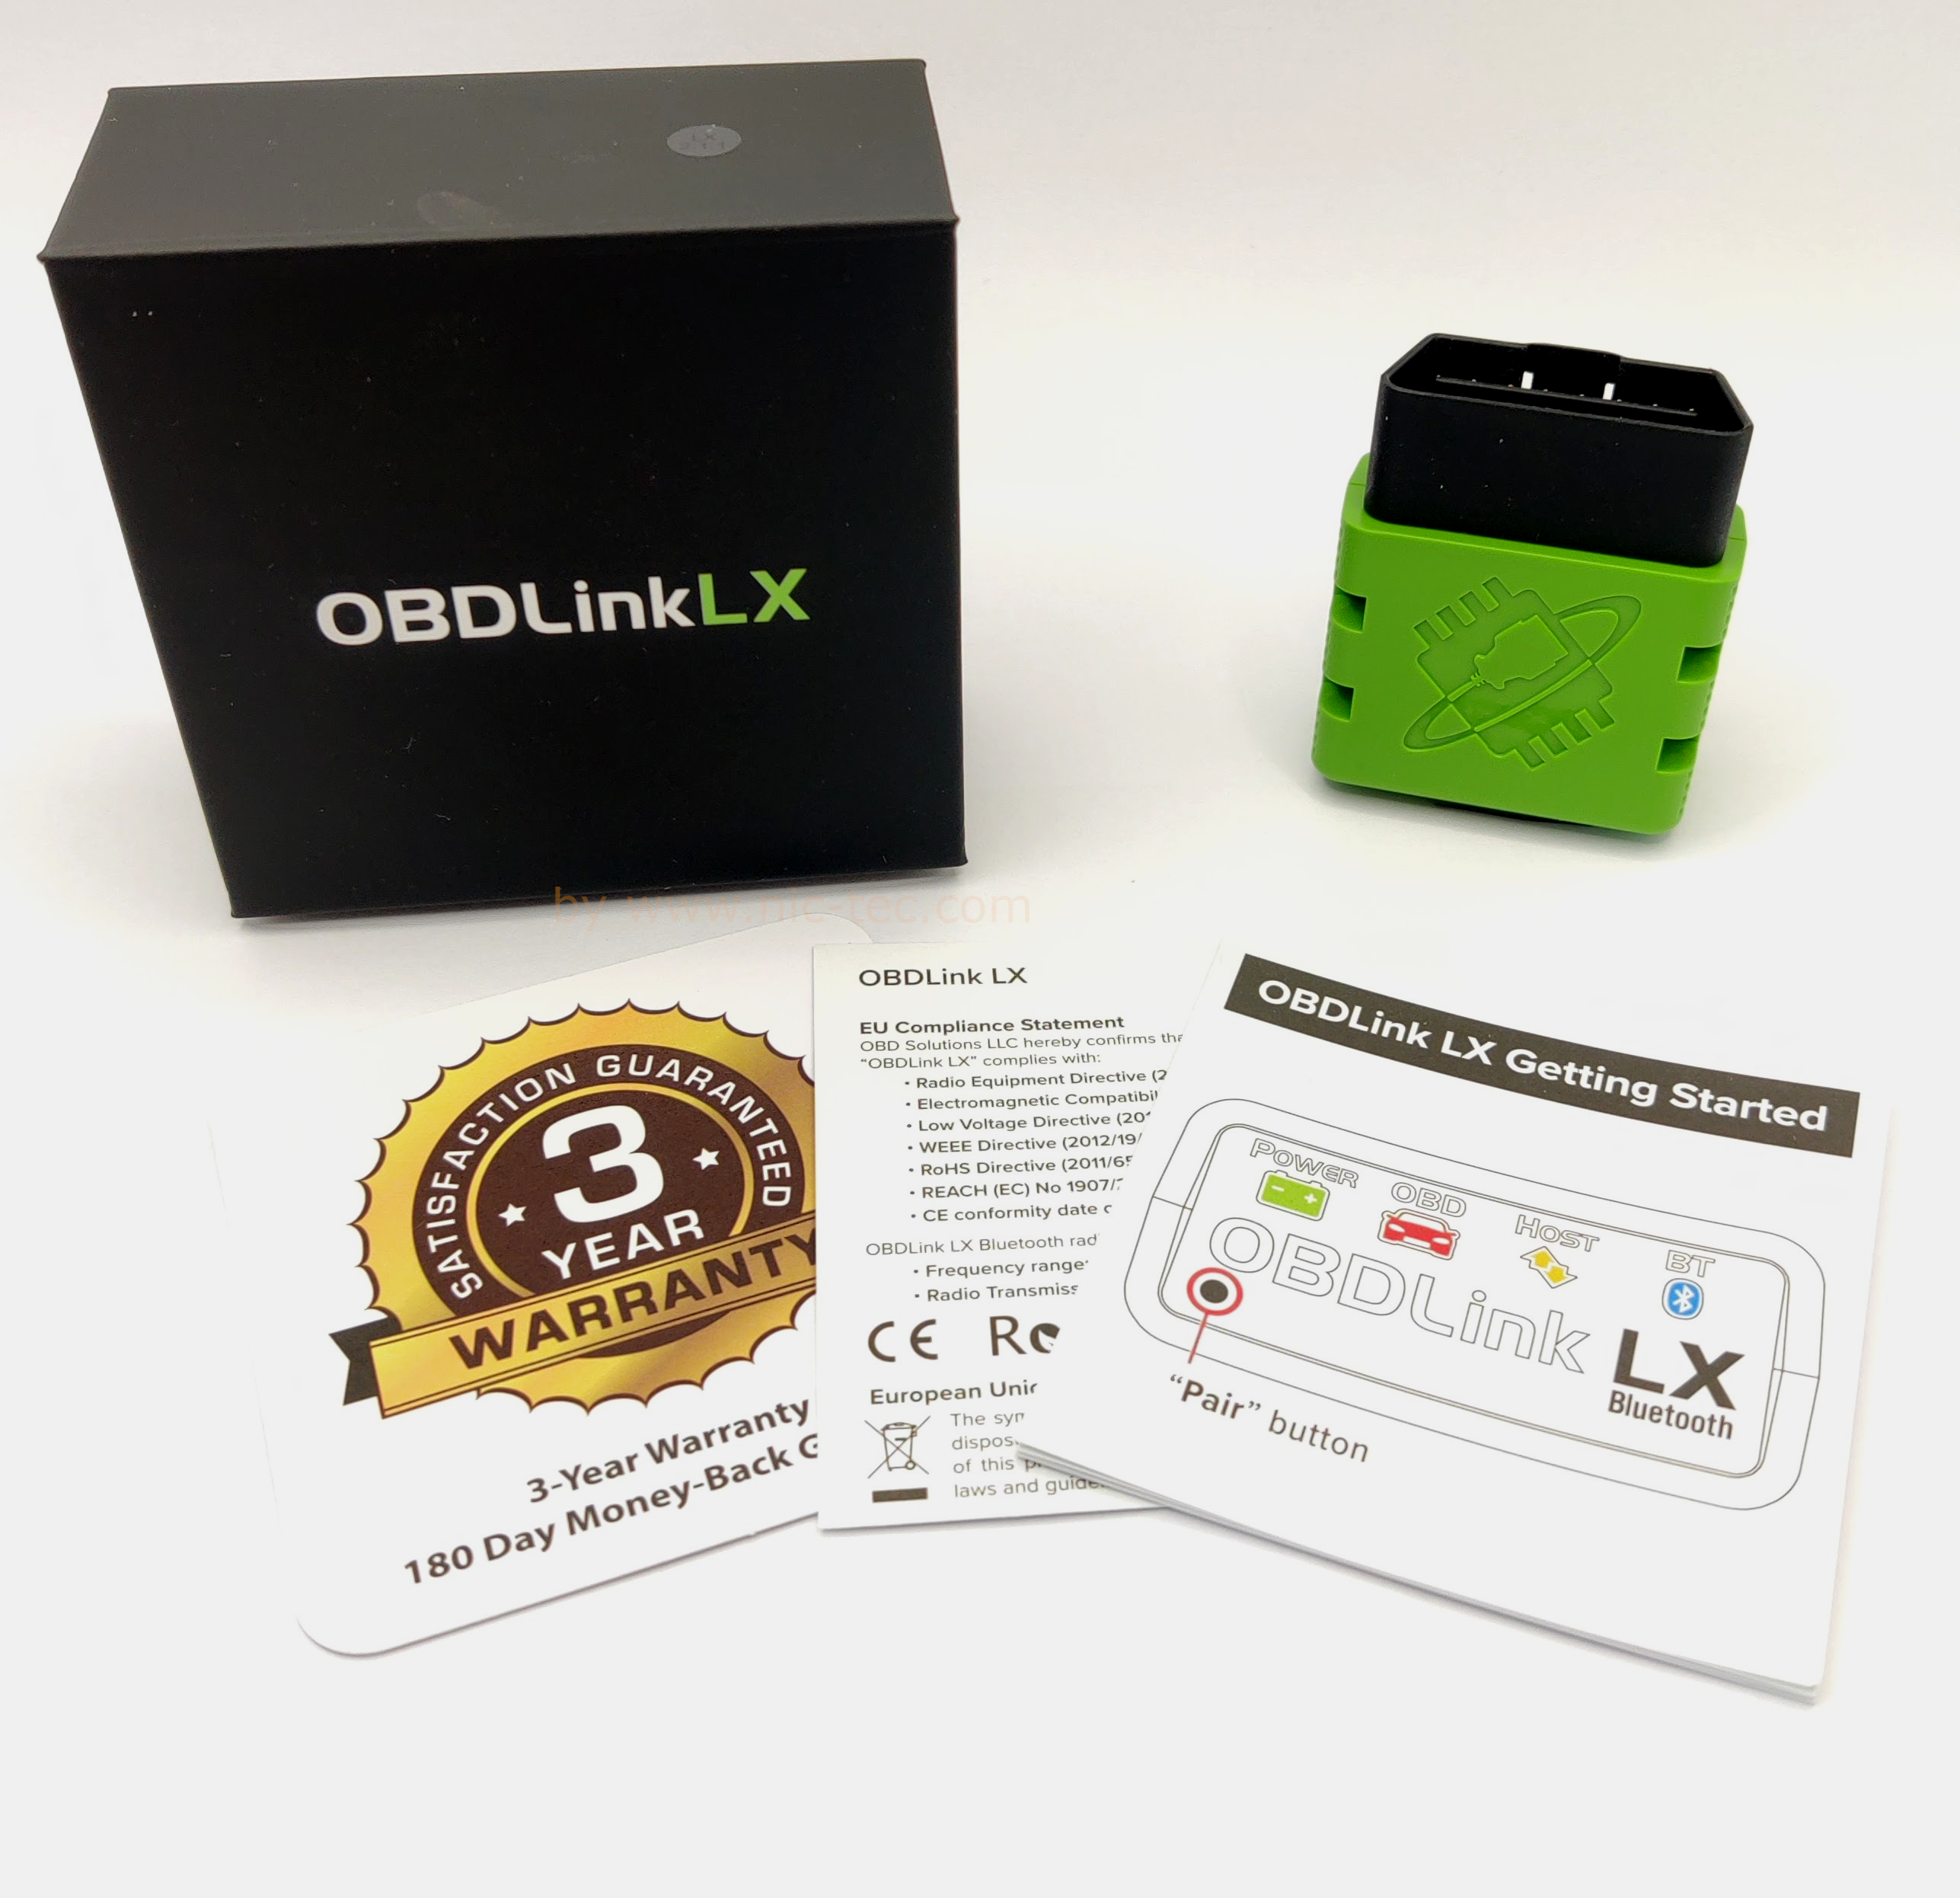 OBDLink LX Bluetooth Original for PC and Android, developed in the US